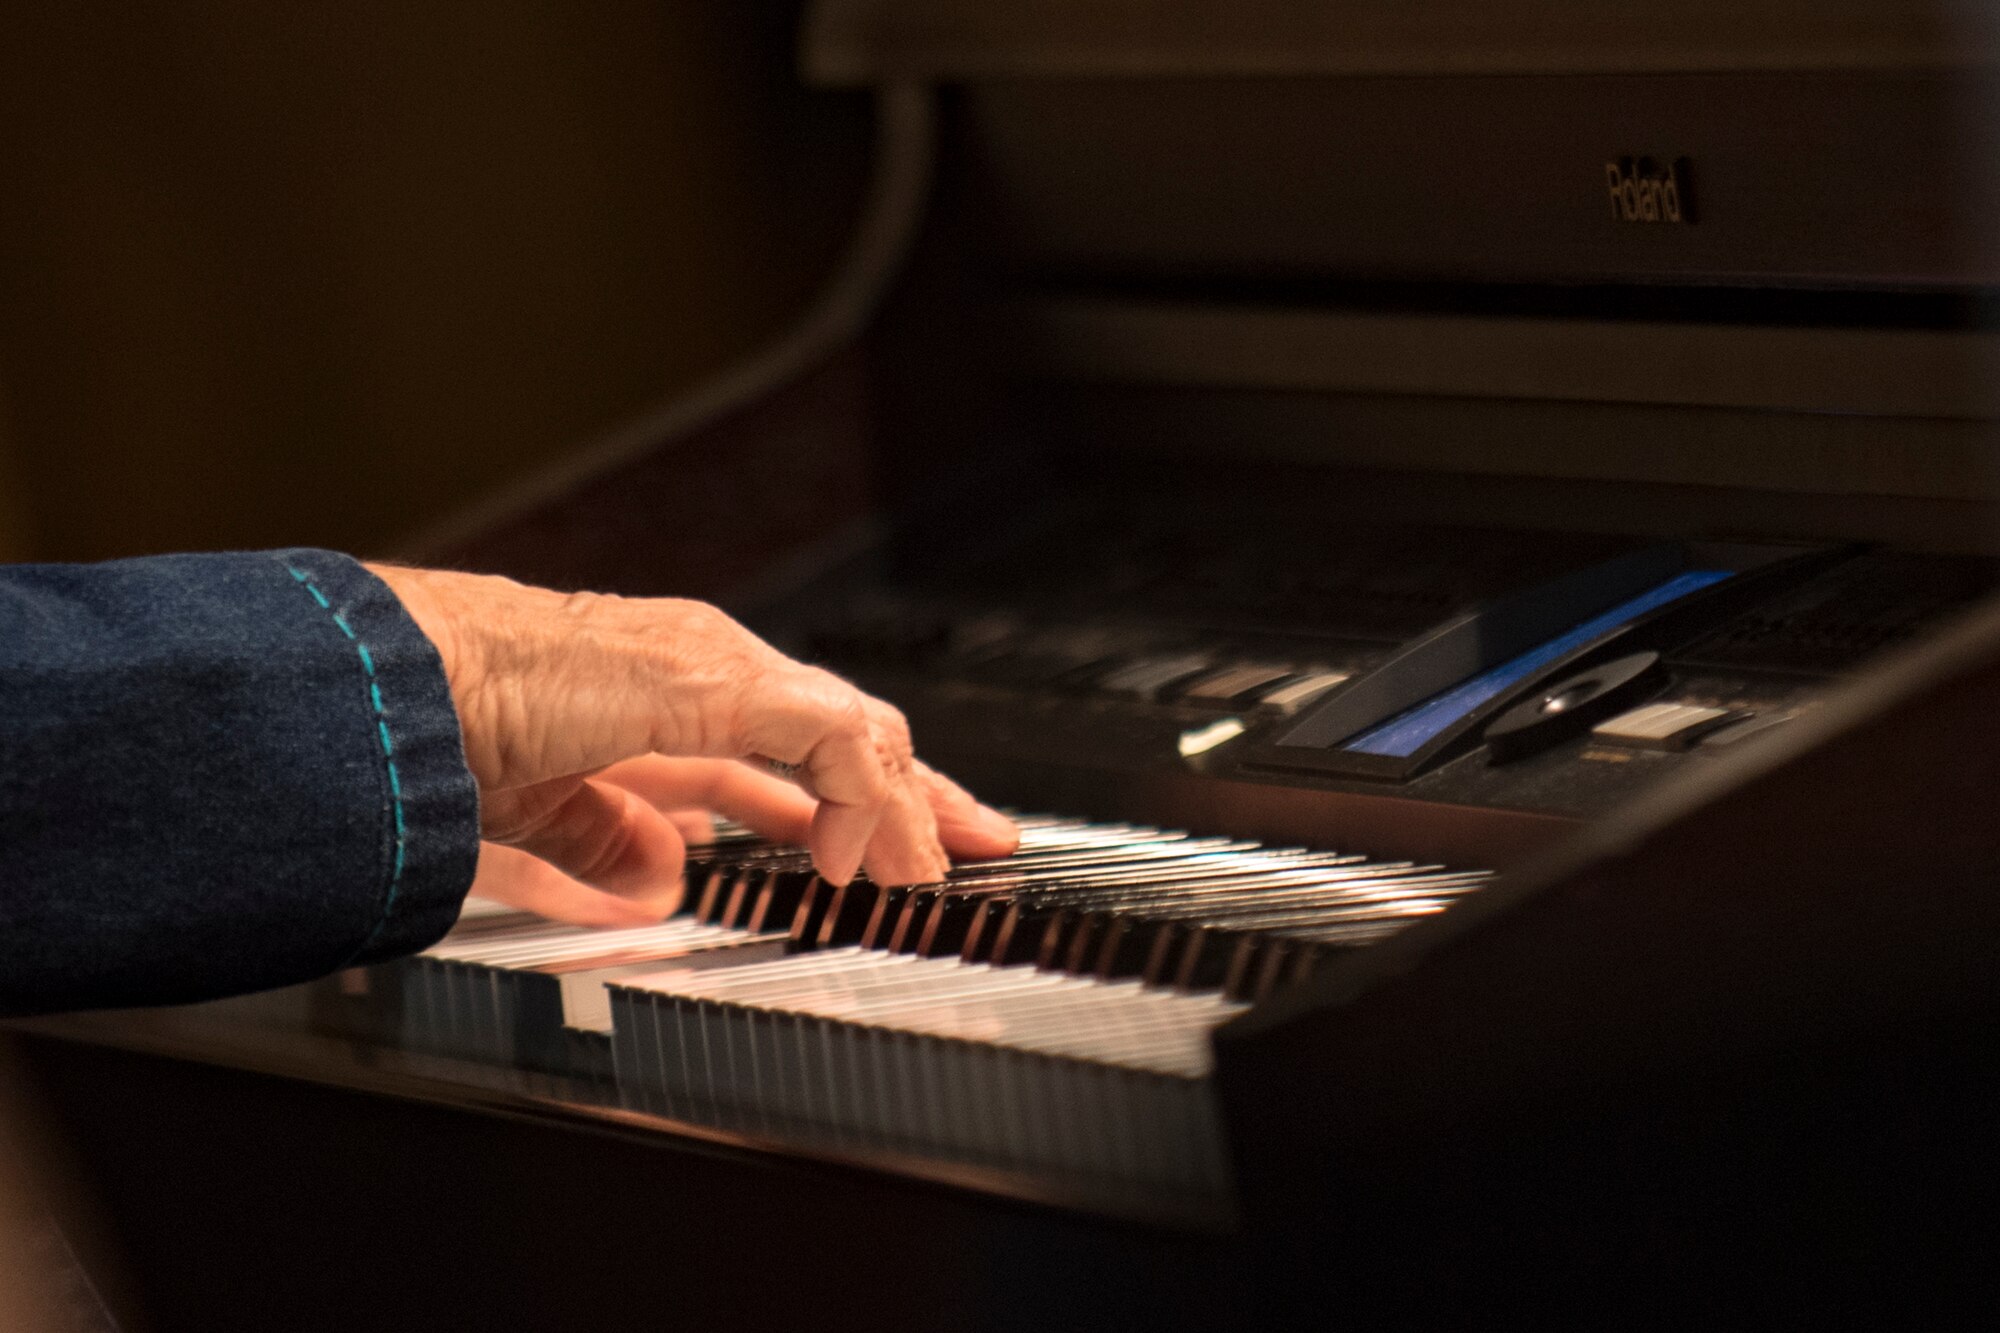 A pianist performs a hymn during a Sacrament of Confirmation ceremony performed by Bishop Robert J. Coyle, Archdiocese of the Military Services, Feb. 12, 2018, at Moody Air Force Base, Ga. Confirmation is the sacrament by which Catholics believe the Holy Spirit gives them the increased ability to practice their faith in every aspect of their lives and to witness Christ in every situation.  The Sacrament of Confirmation helps a person remain faithful to his or her baptismal commitment to witness to Christ and to serve others. (U.S. Air Force photo by Senior Airman Daniel Snider)